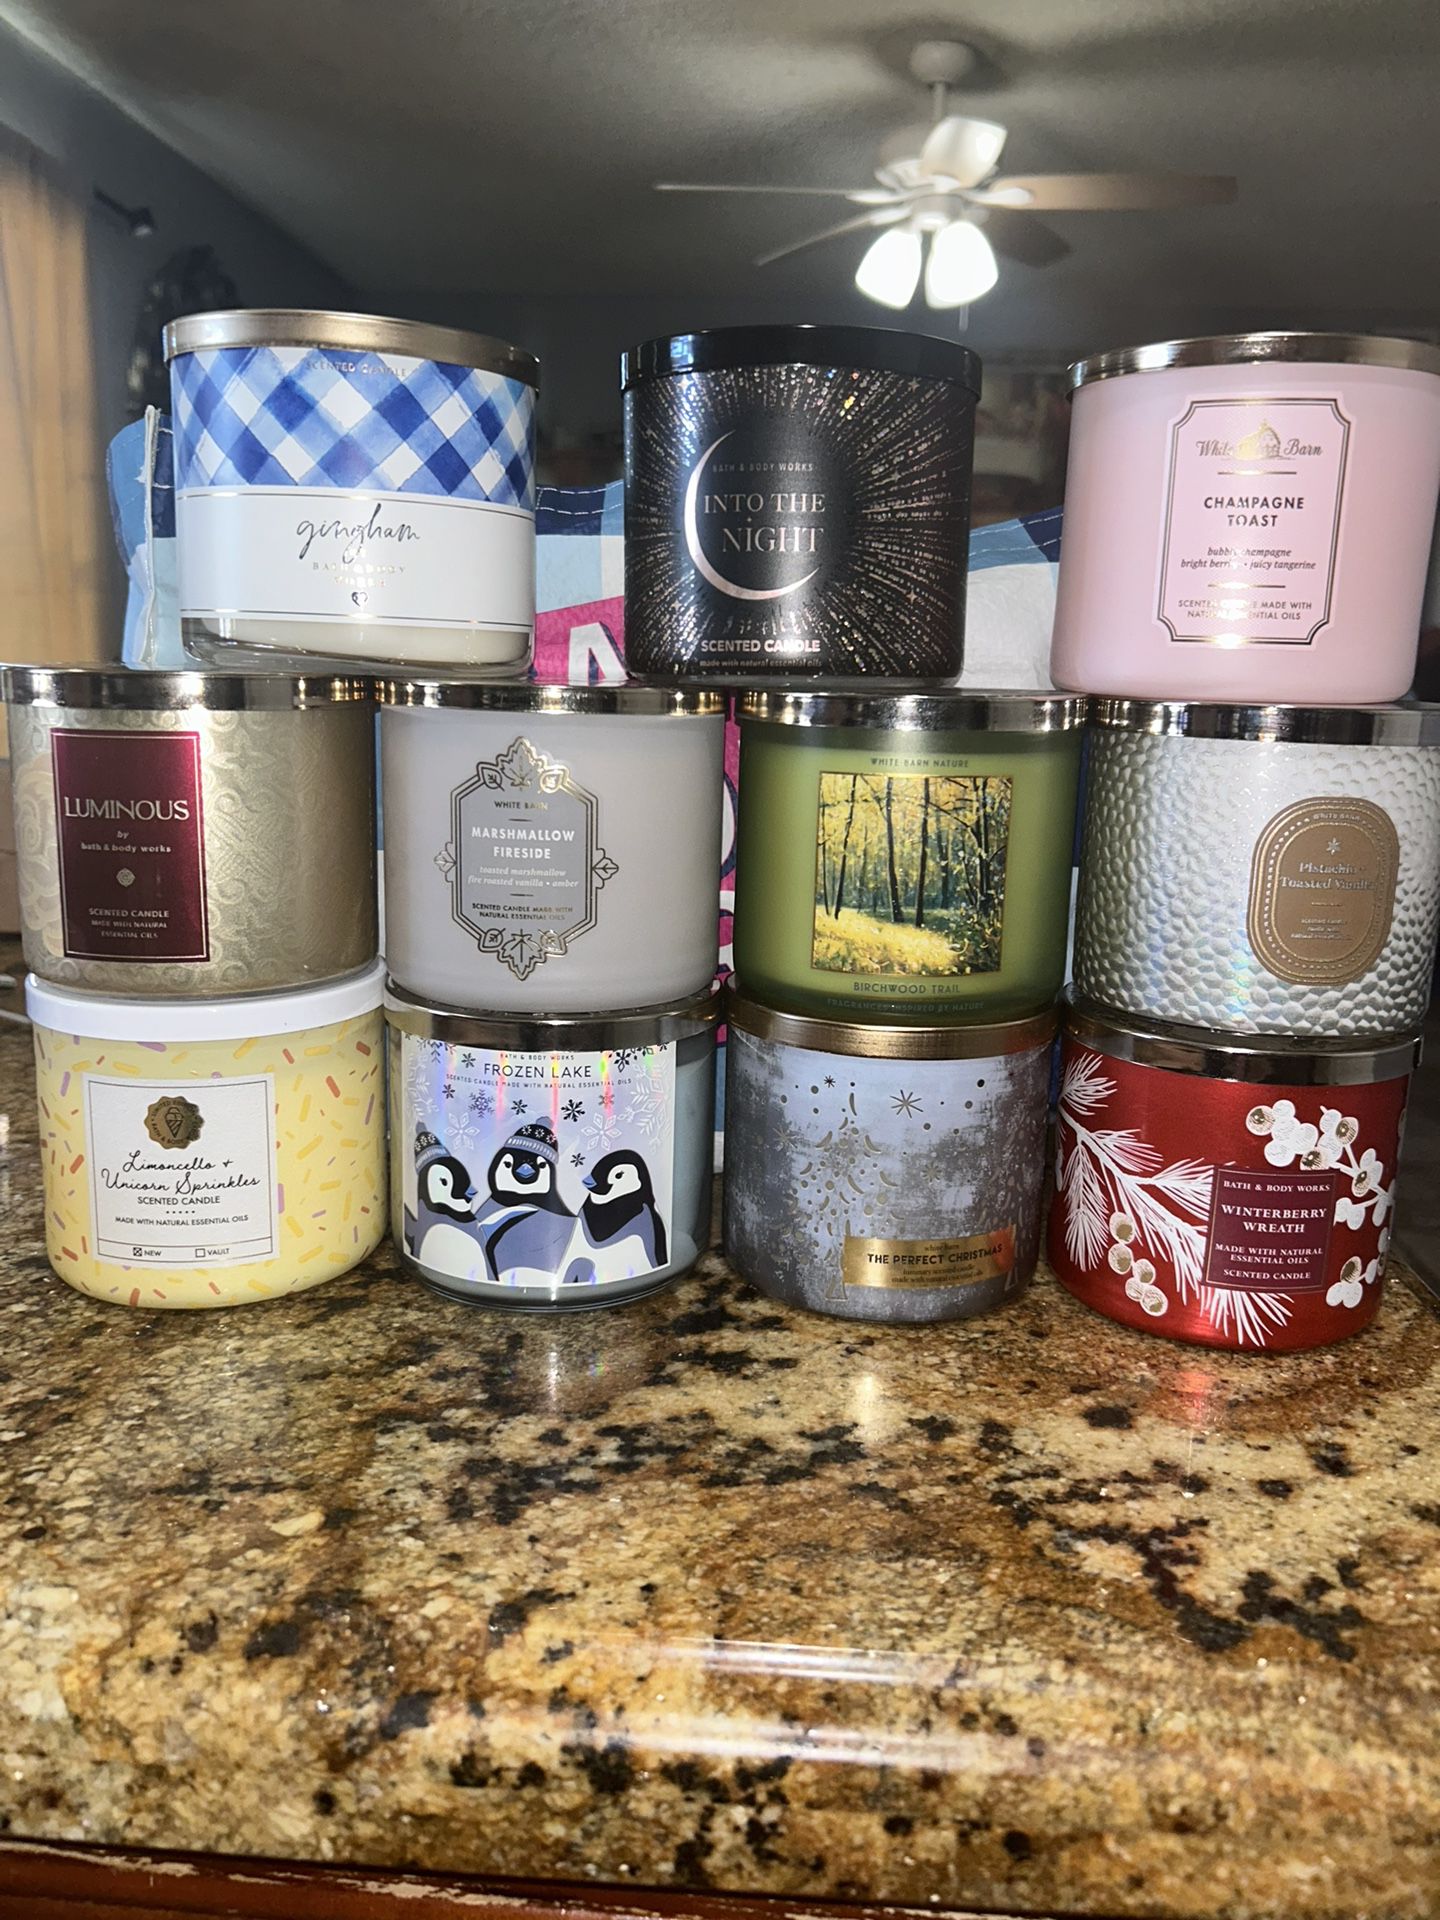 3 Wick Candles $20 Each Firm 